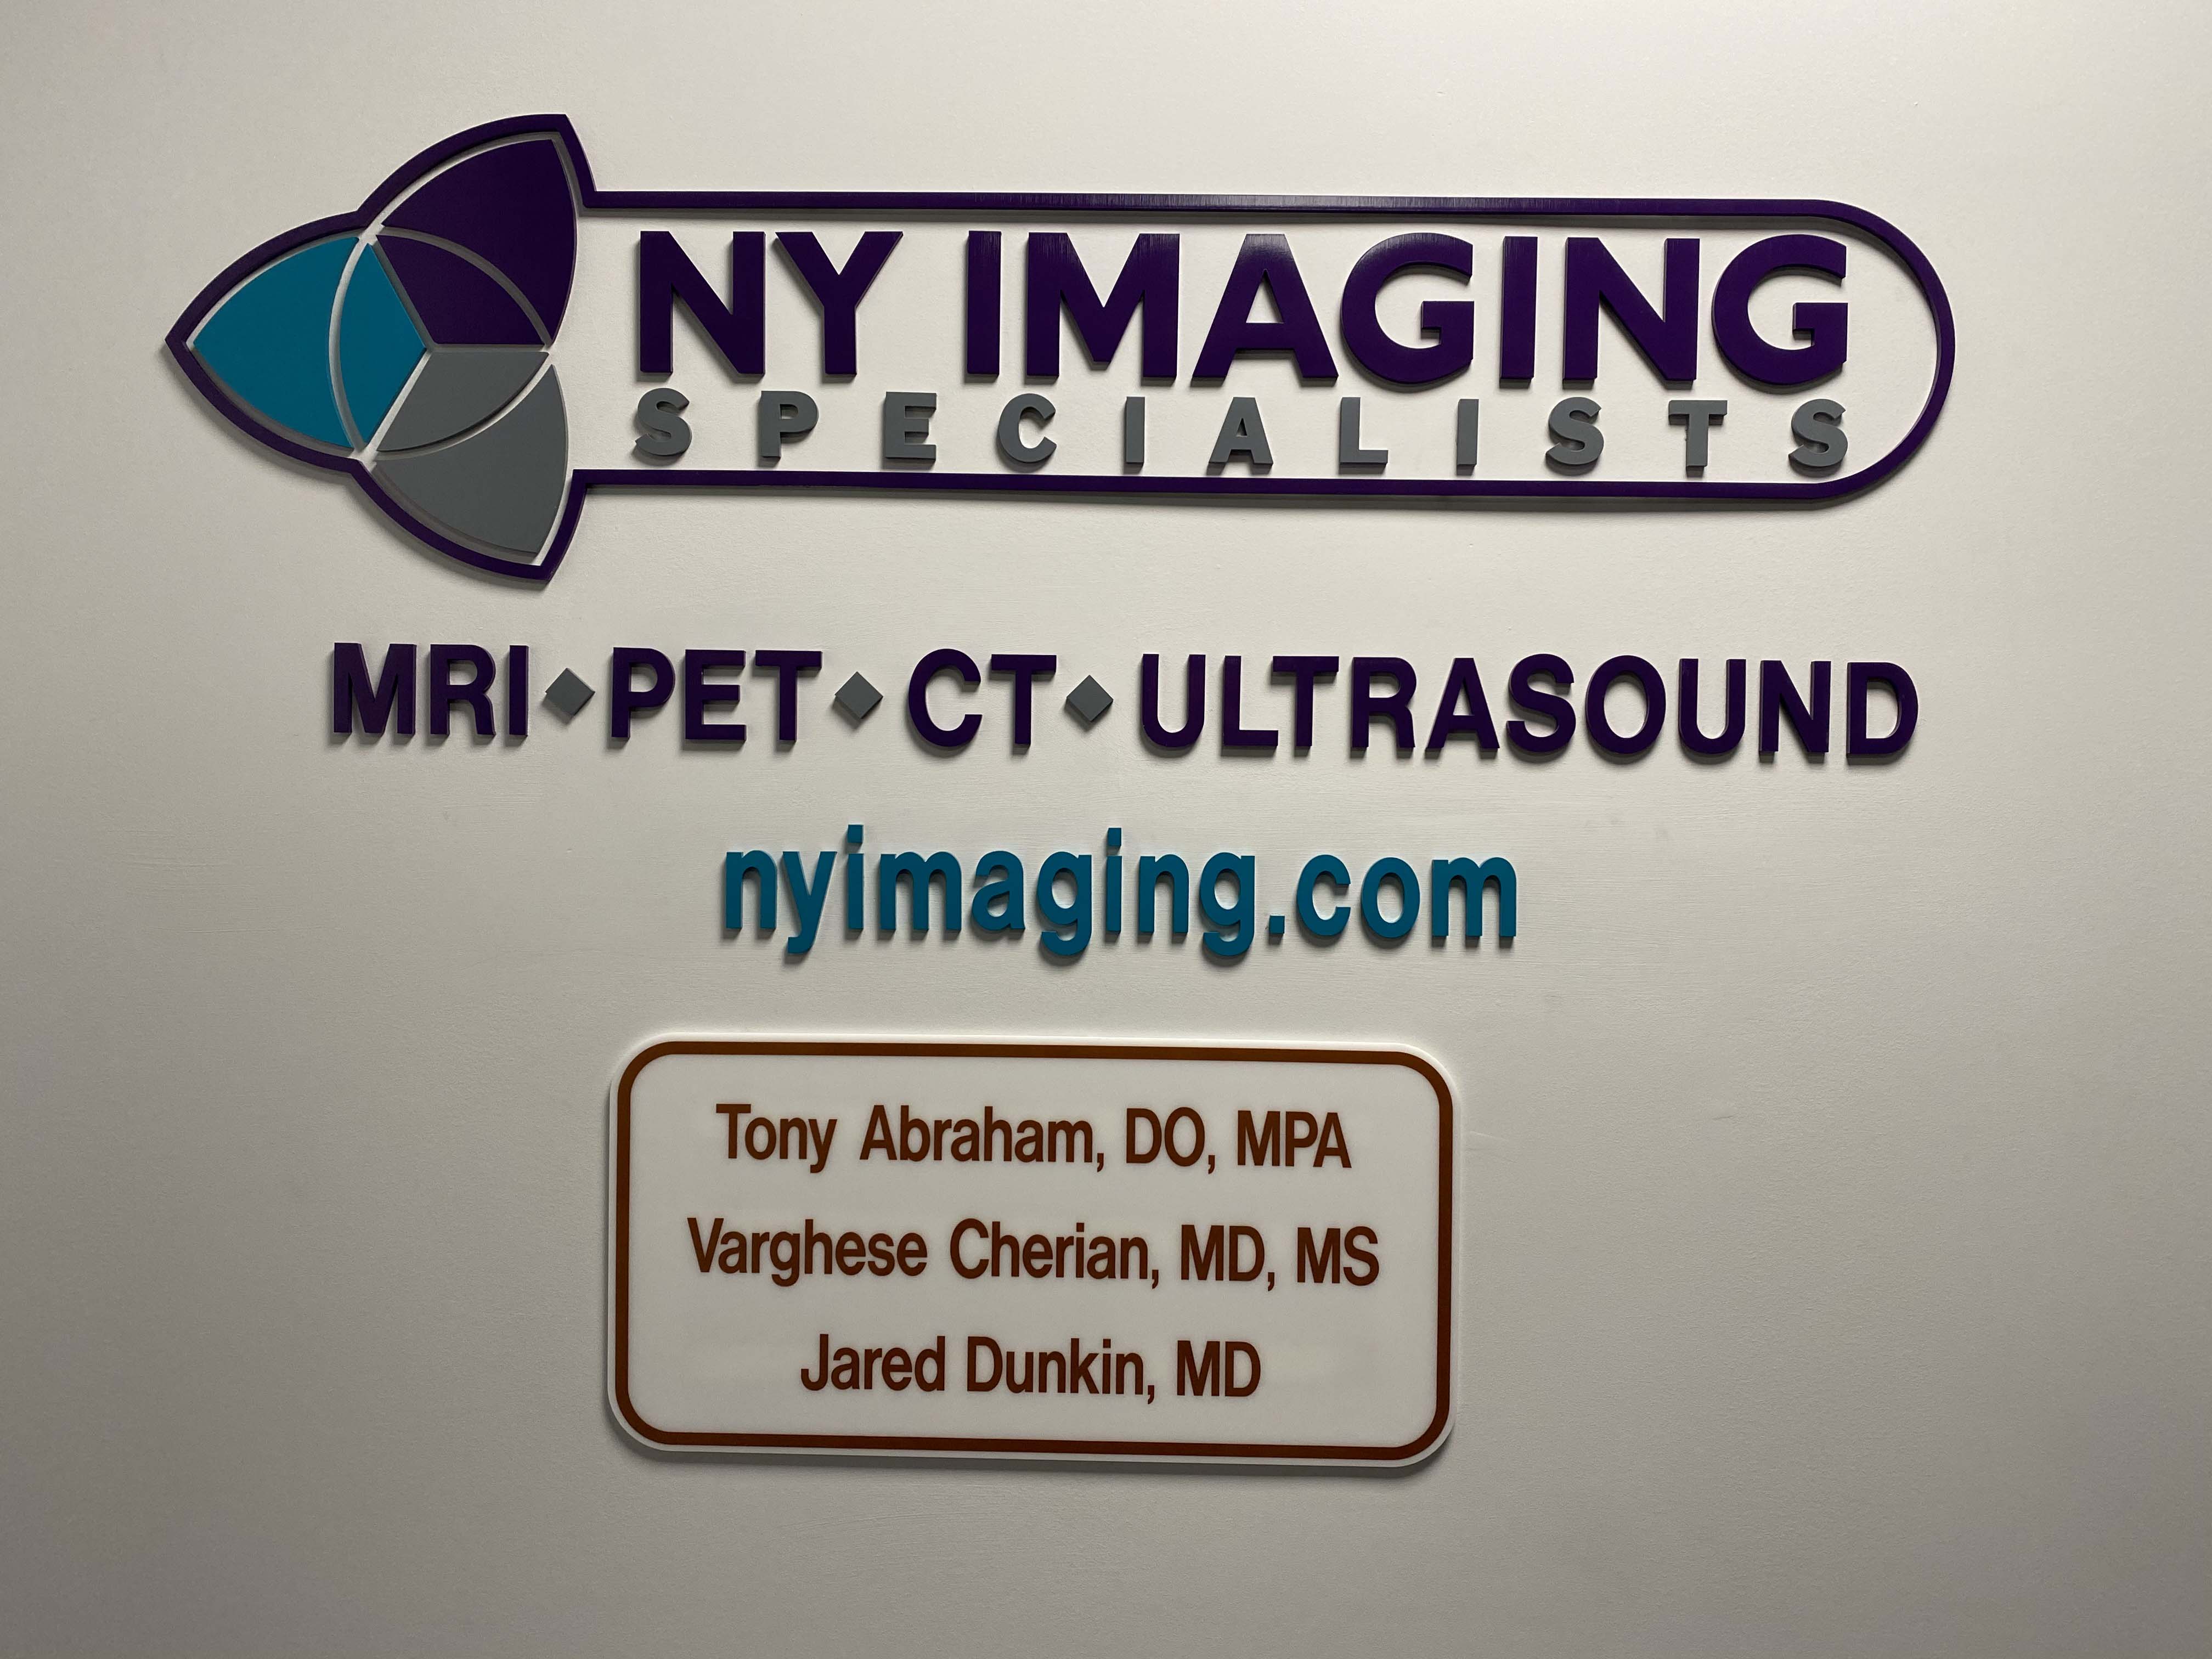 NY Imaging Specialists Grand Opening